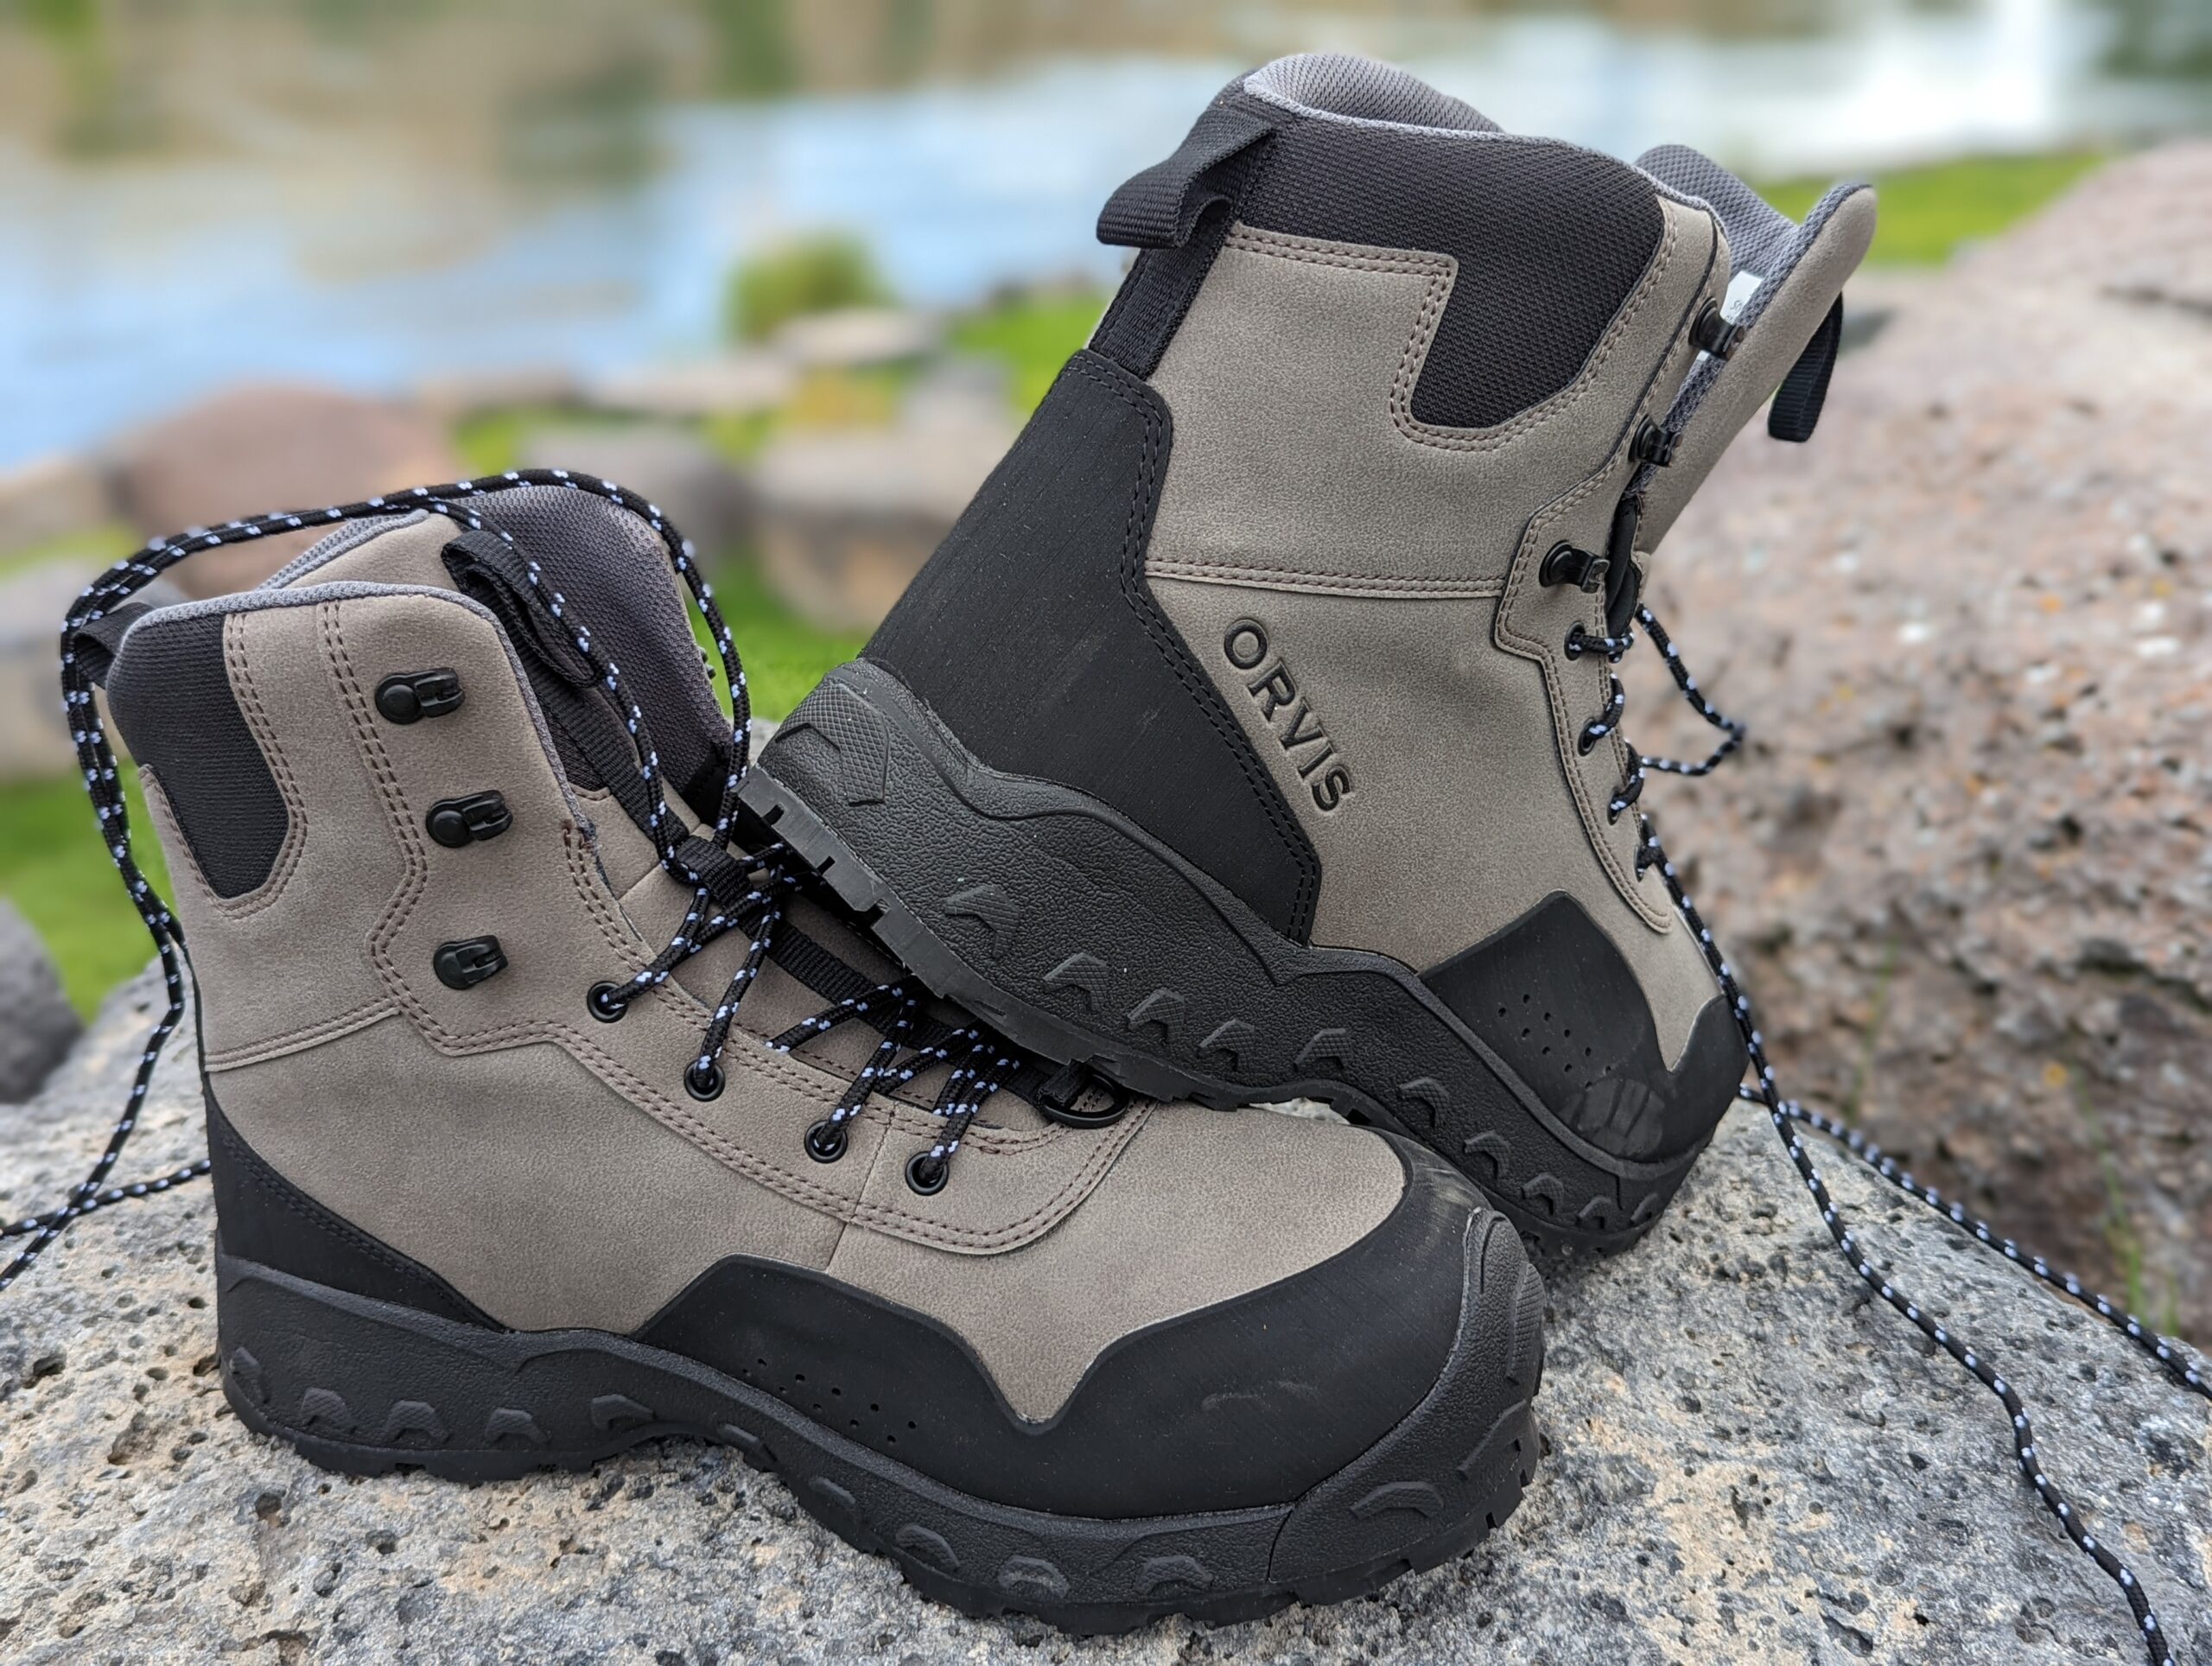 Lightweight Wading Boots for Men Felt Sole Wading Shoes Trout